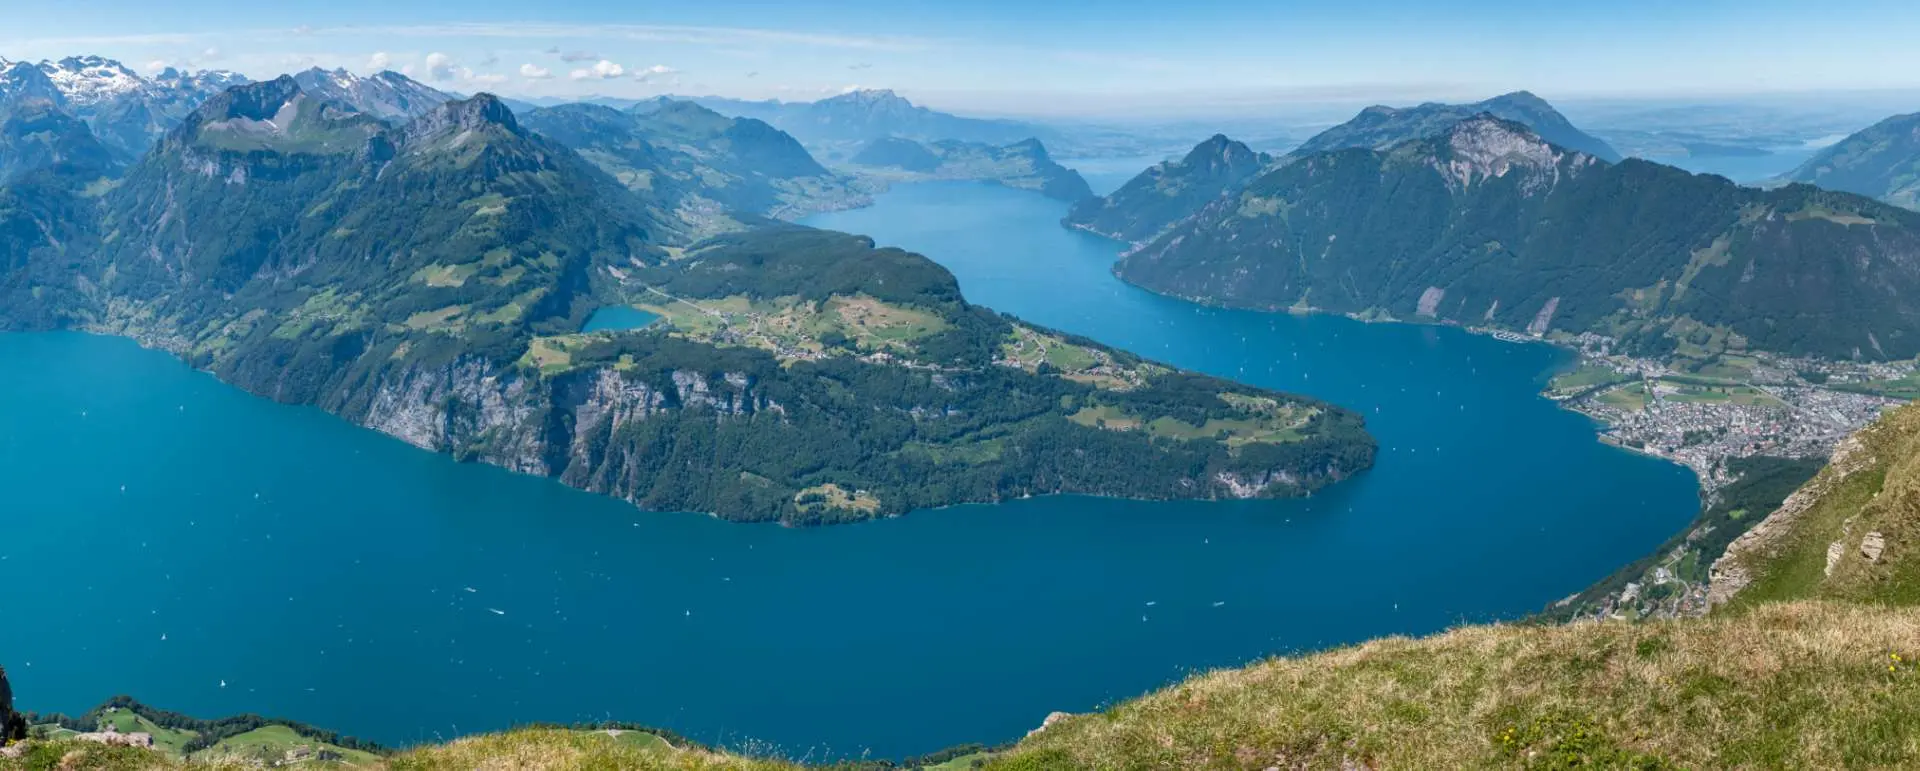 Lake Lucerne - the destination for workers